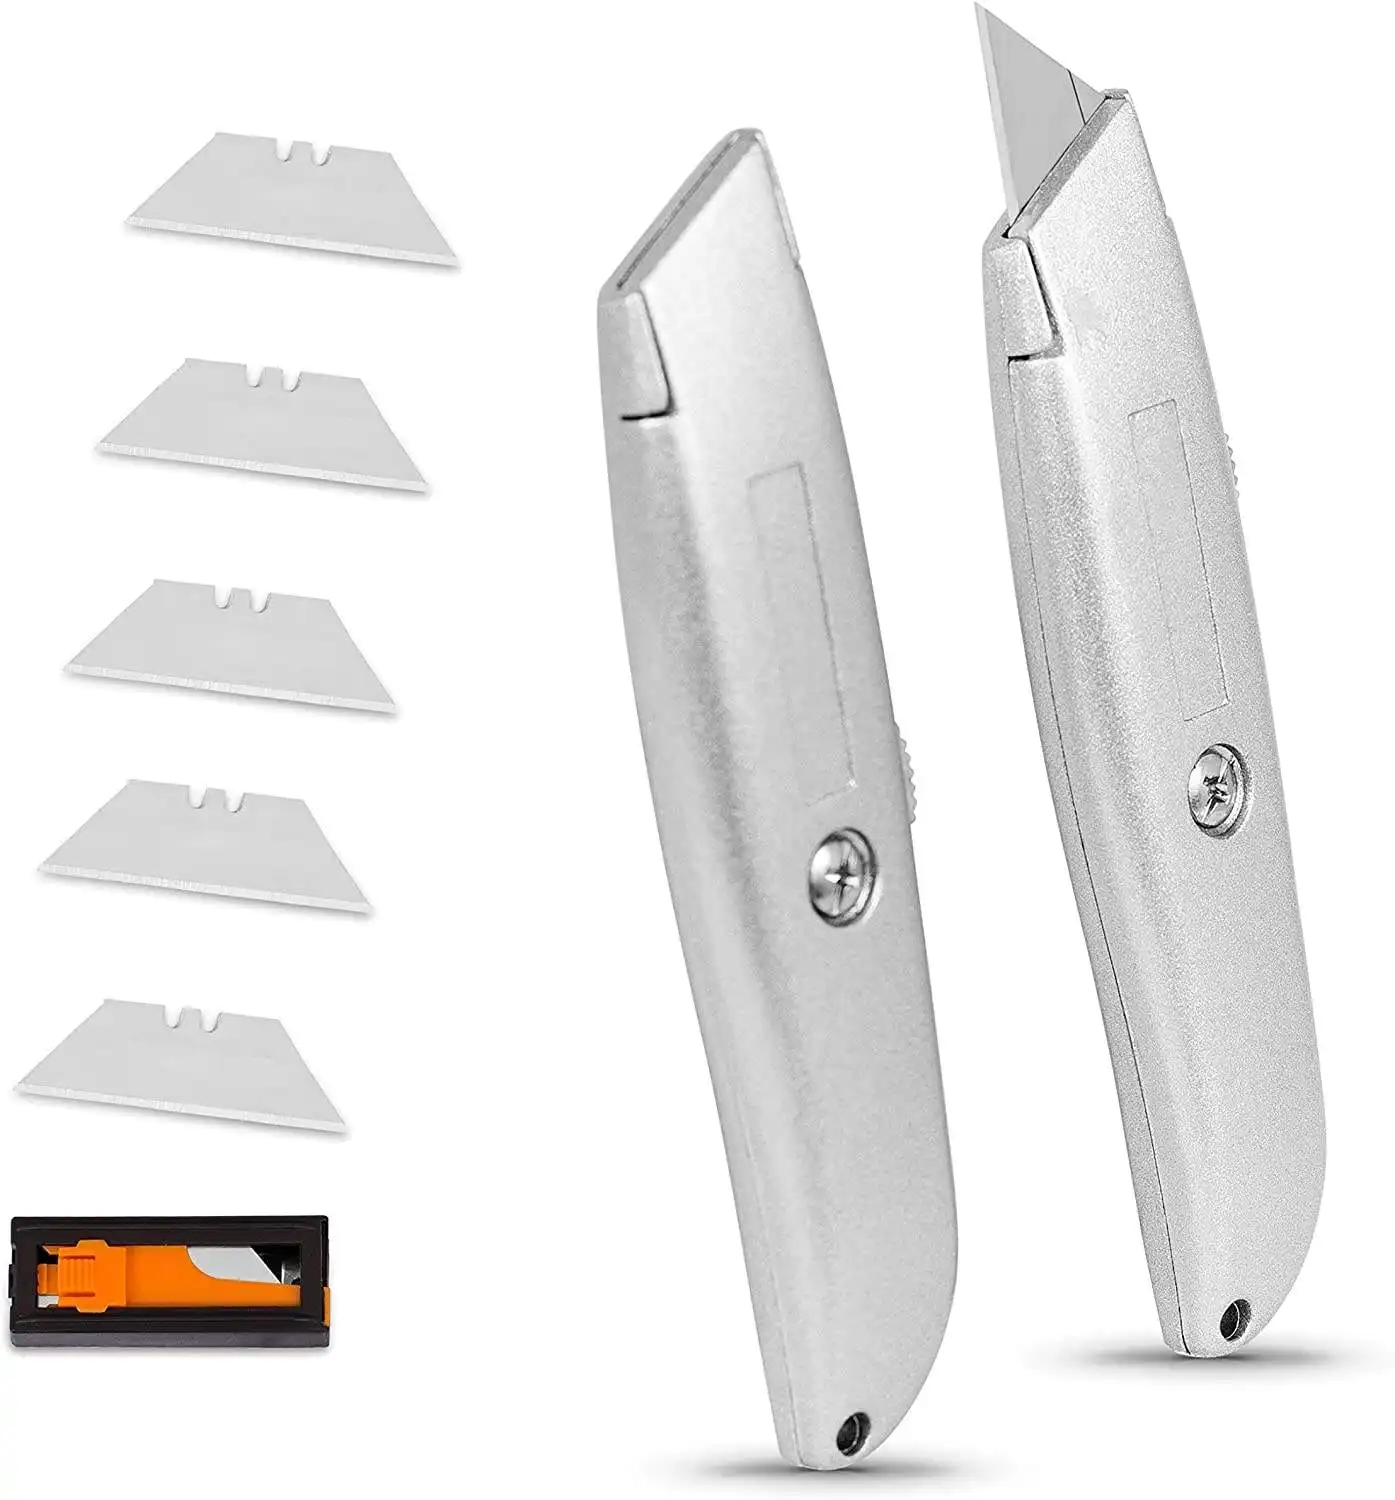 Retractable Utility Knife Box Cutter with Durable Metal Body and 5 Extra Blades